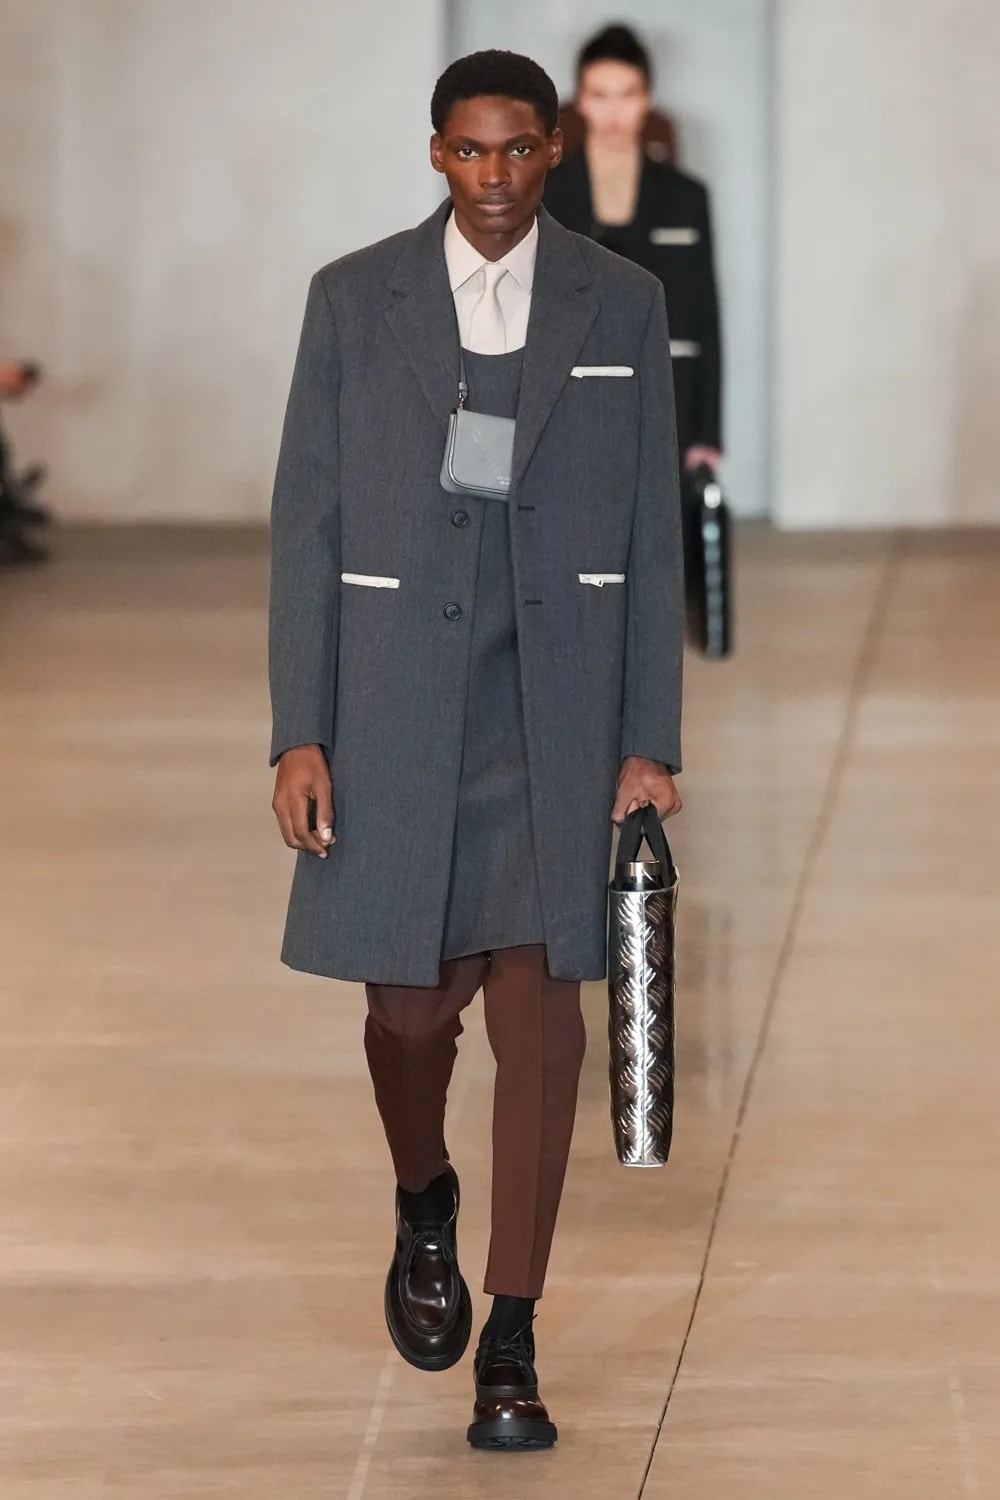 Prada Goes From Strength to Strength With Its F/W 23 Collection